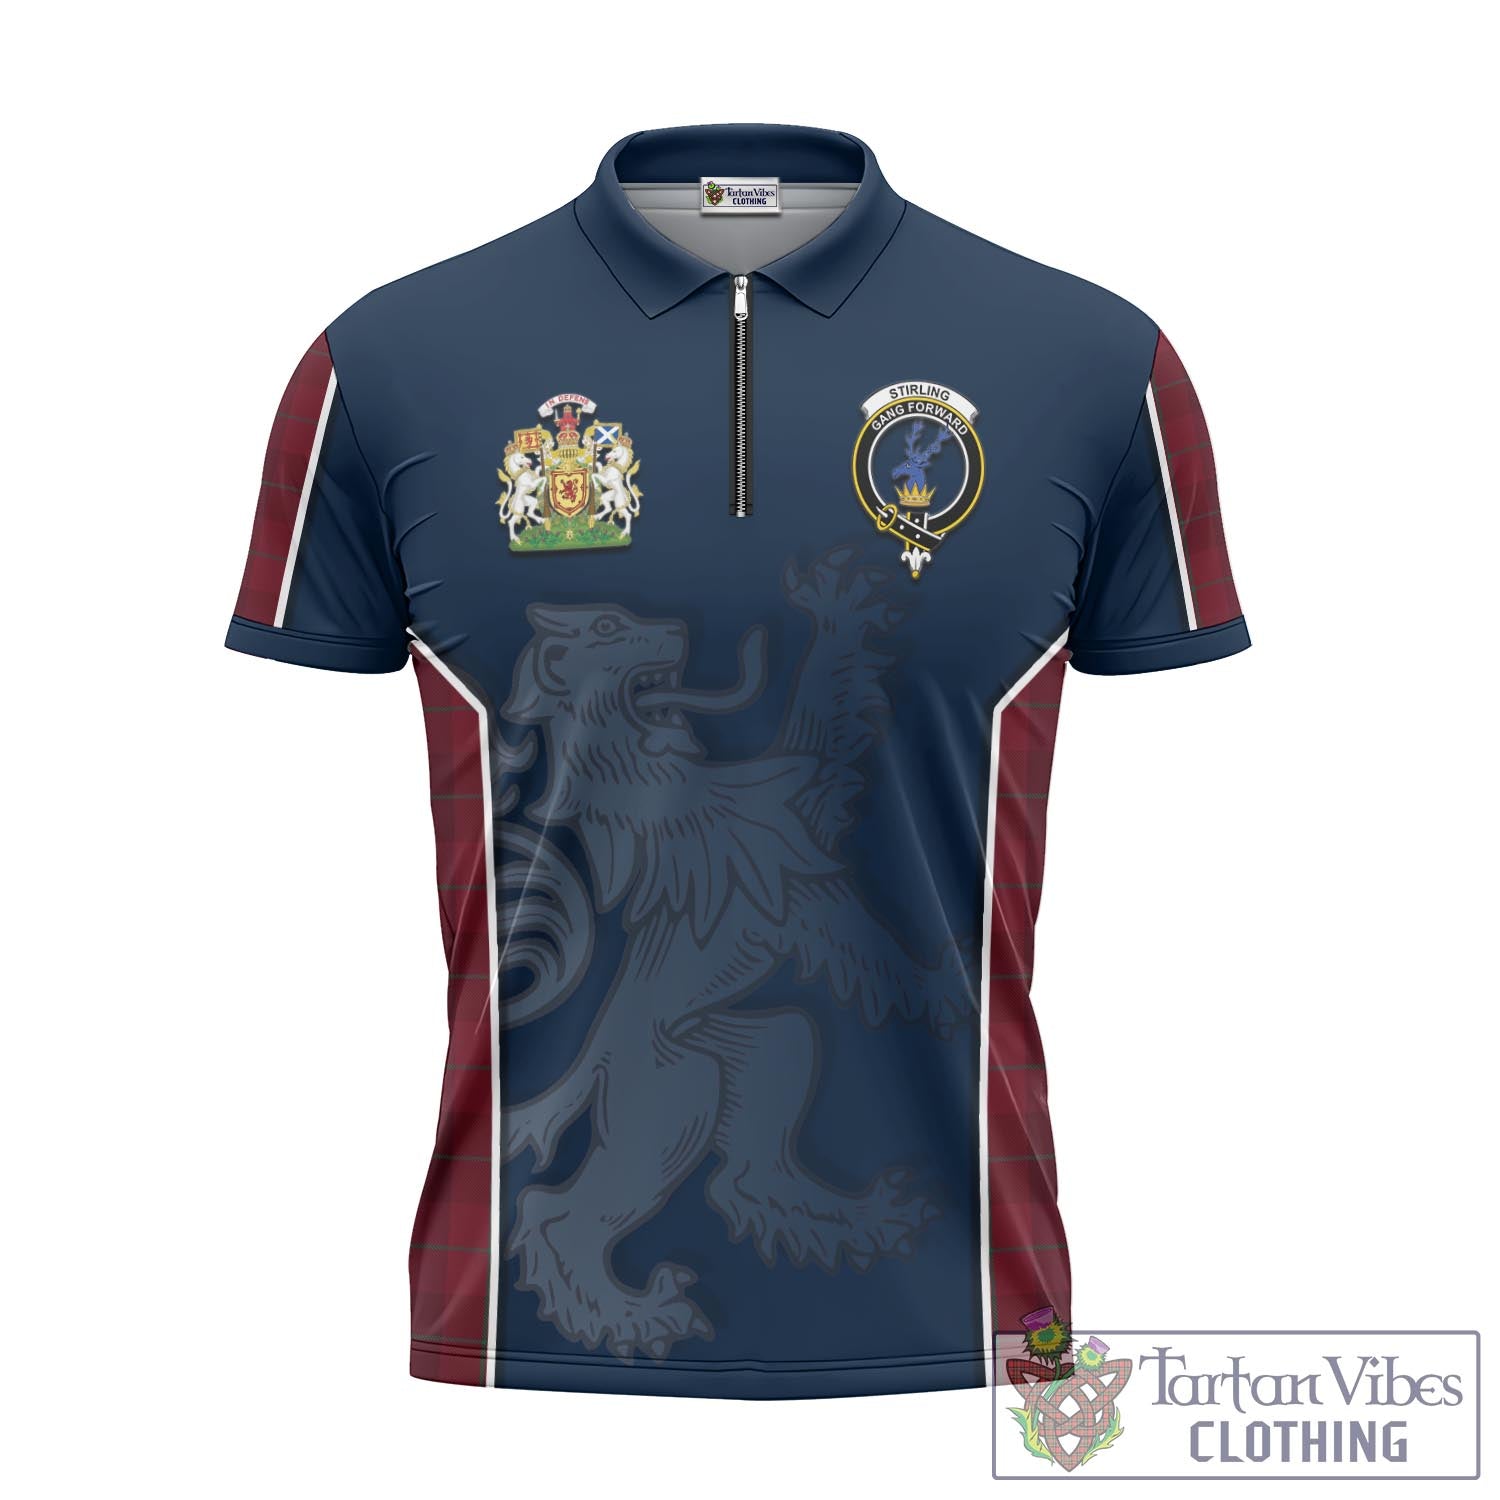 Tartan Vibes Clothing Stirling of Keir Tartan Zipper Polo Shirt with Family Crest and Lion Rampant Vibes Sport Style